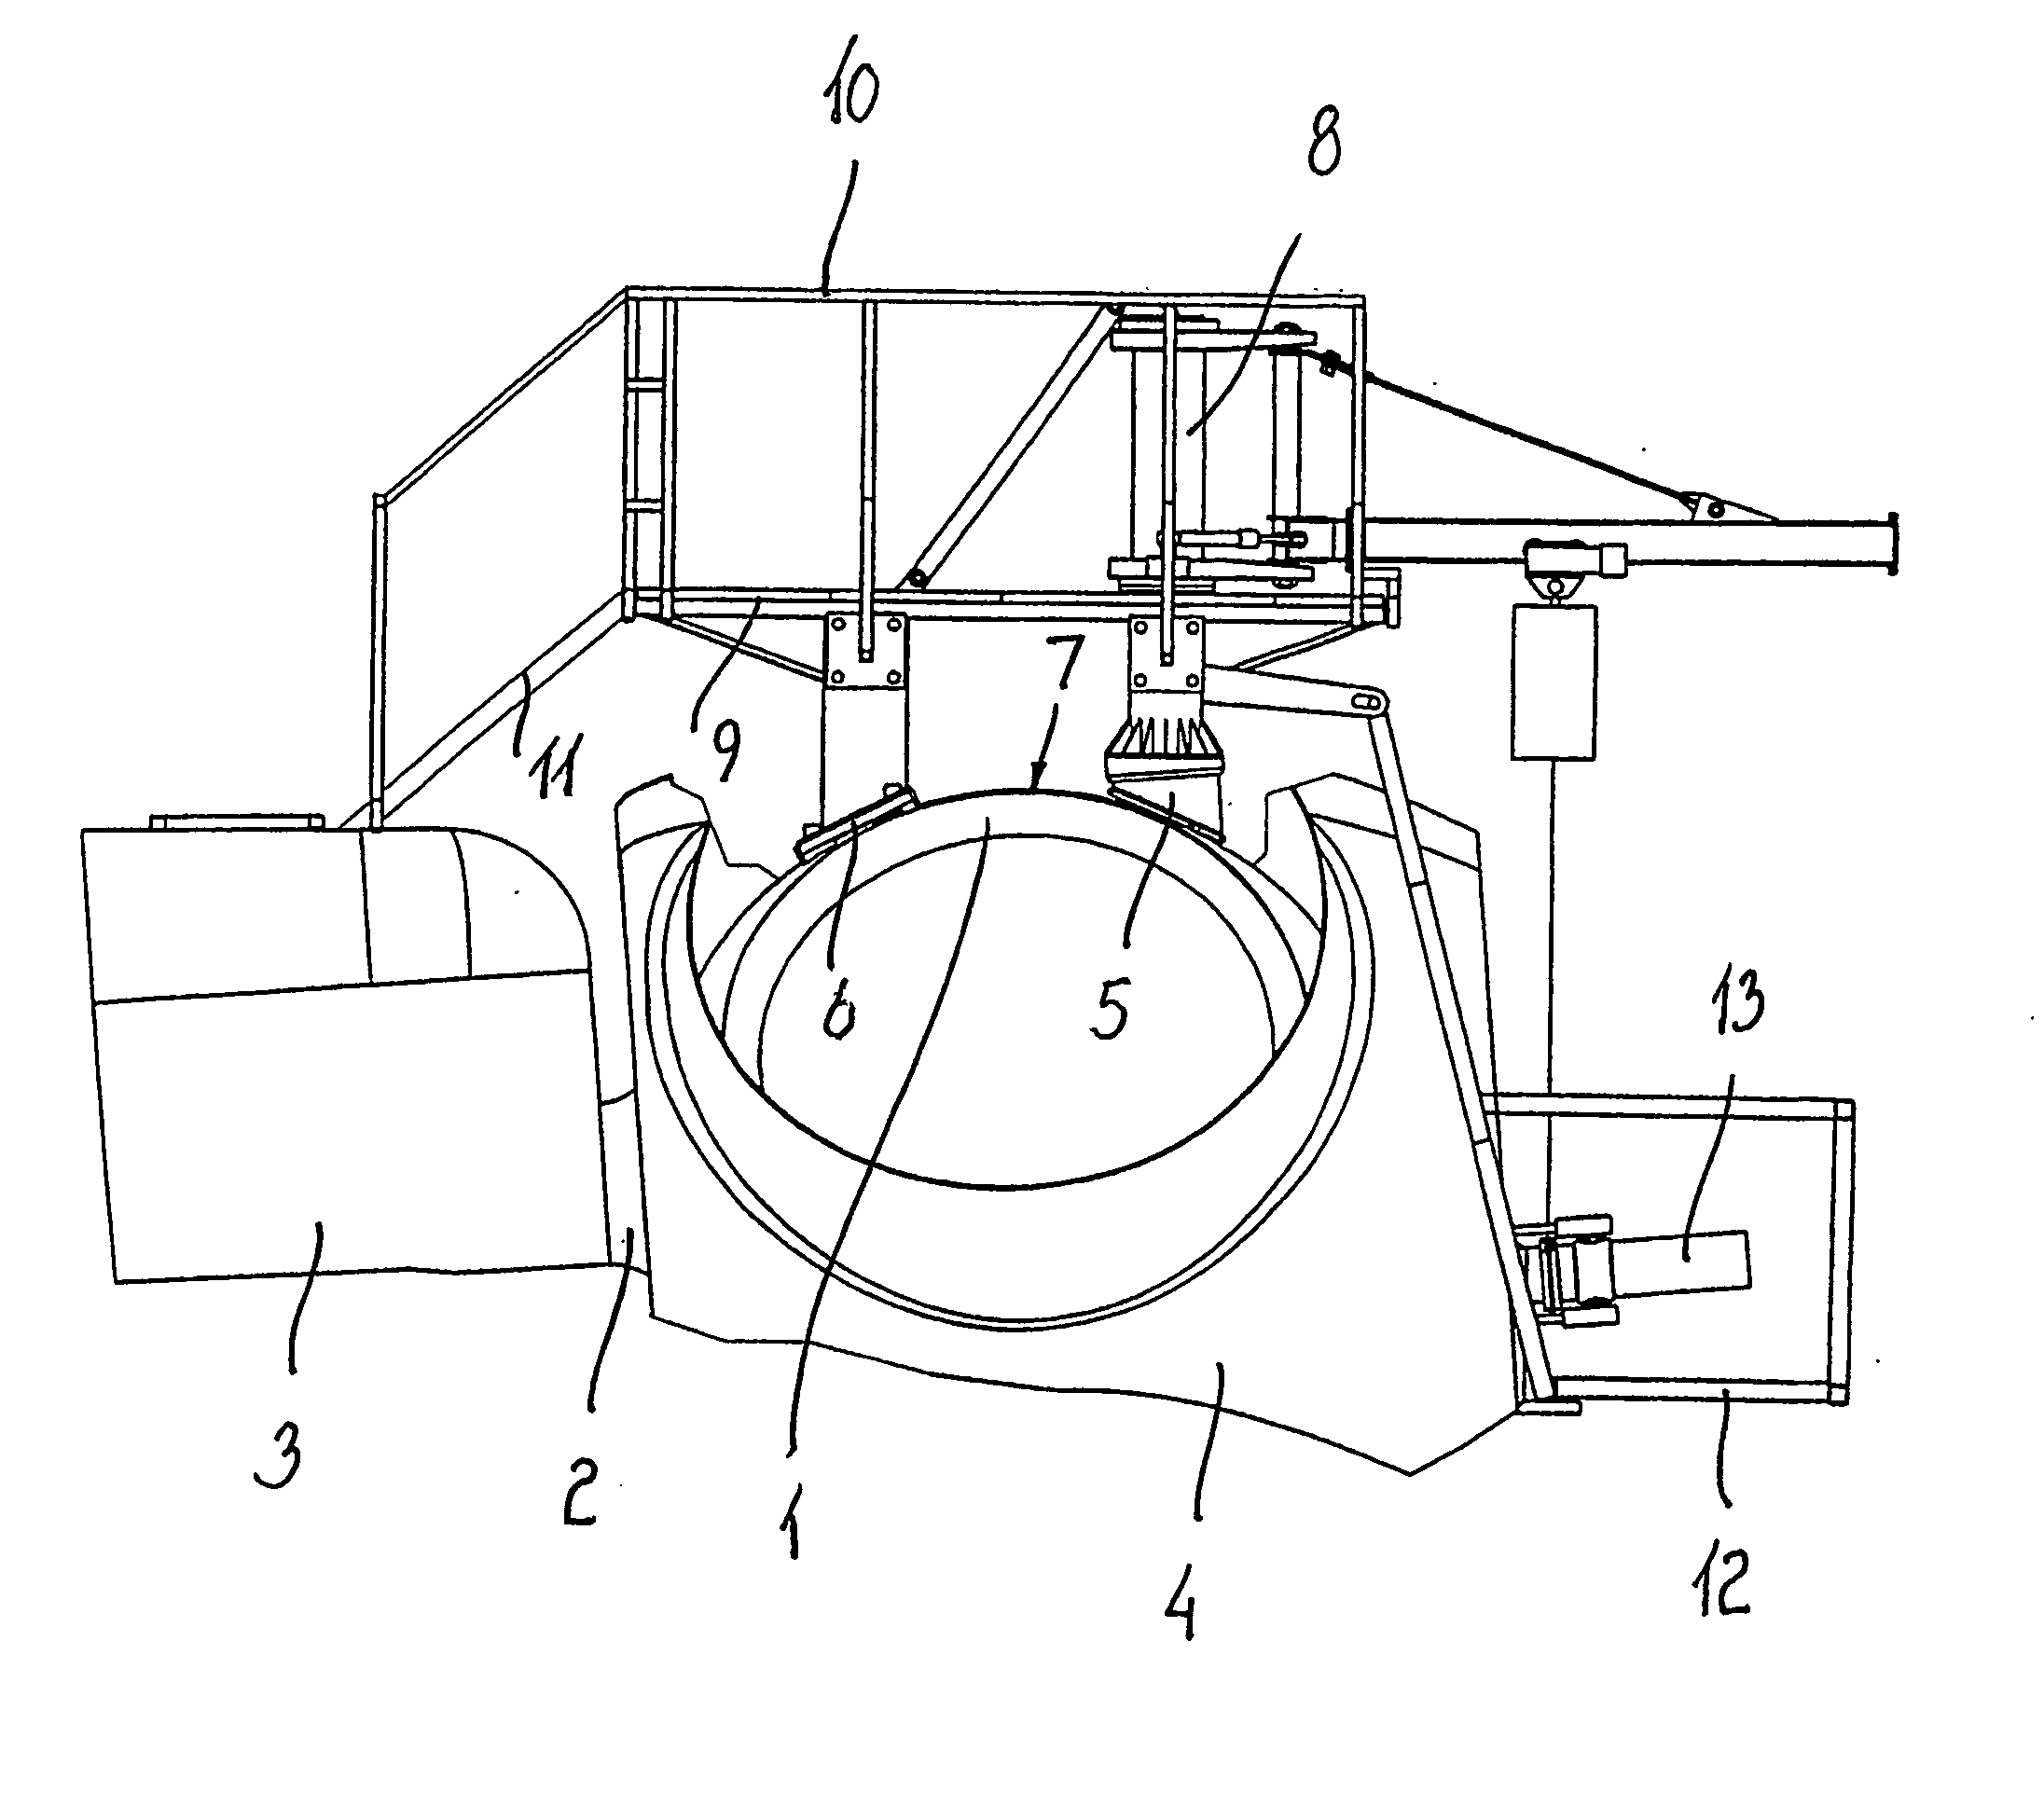 Method of Conducting Service on a Wind Turbine Using Equipment Mounted on the Hub